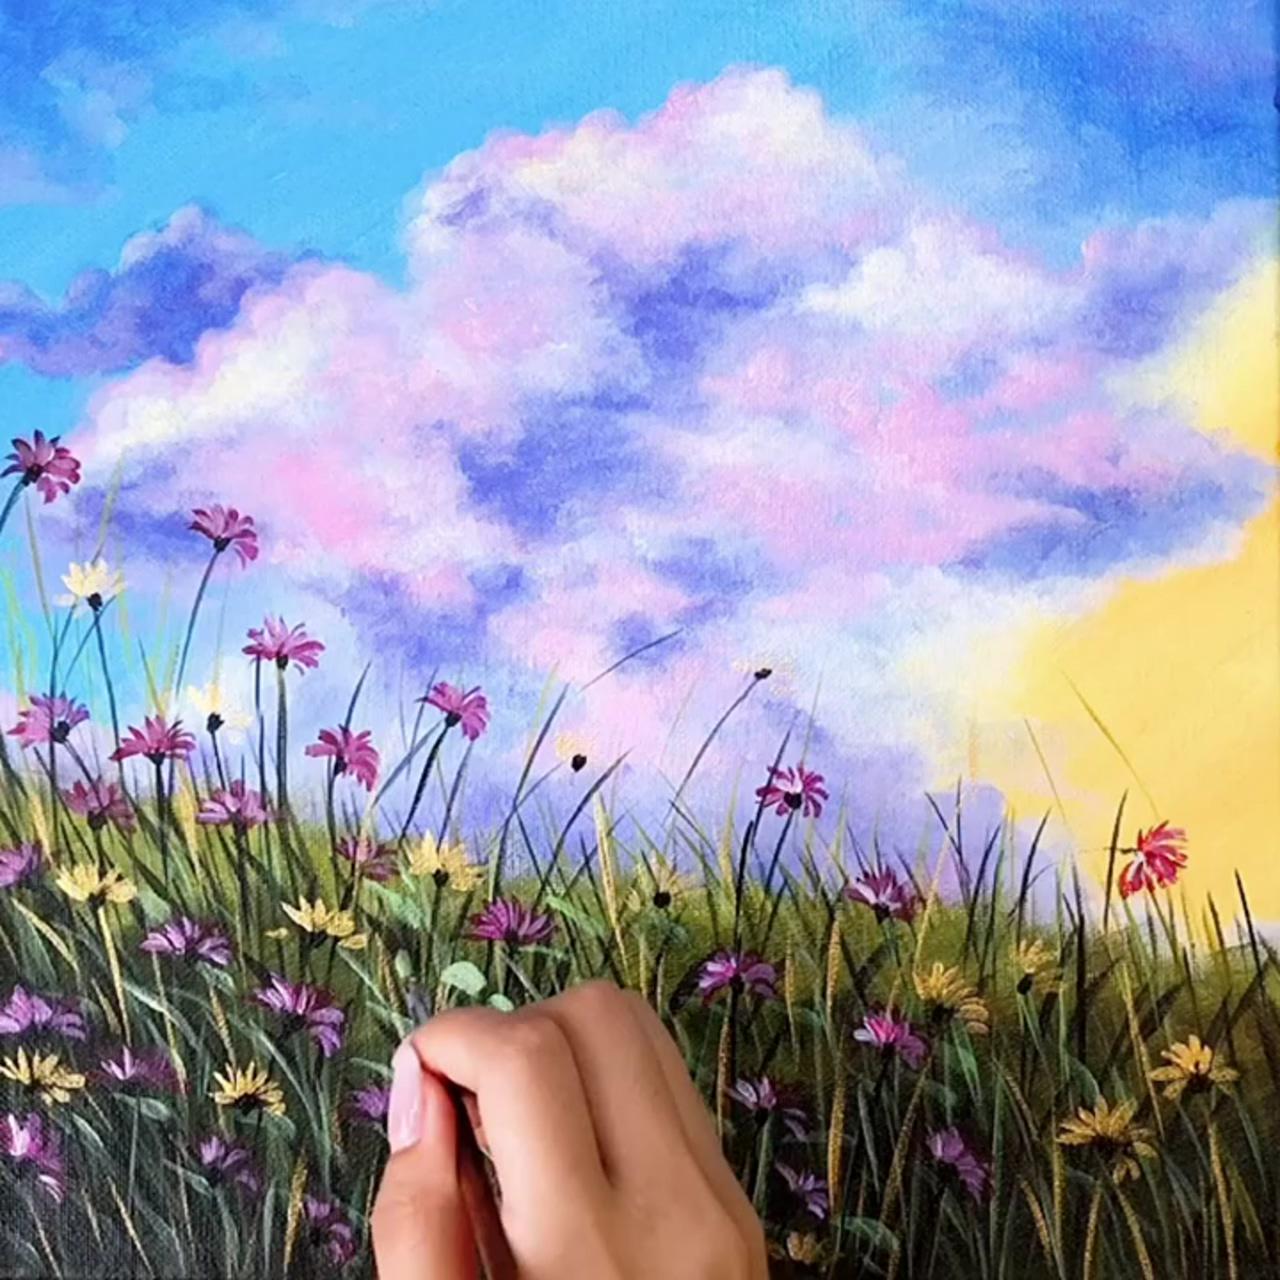 How to draw flowers and grass, acrylic painting tutorial, sophia art | sophia art,acrylic painting tutorial no. 41,#shorts